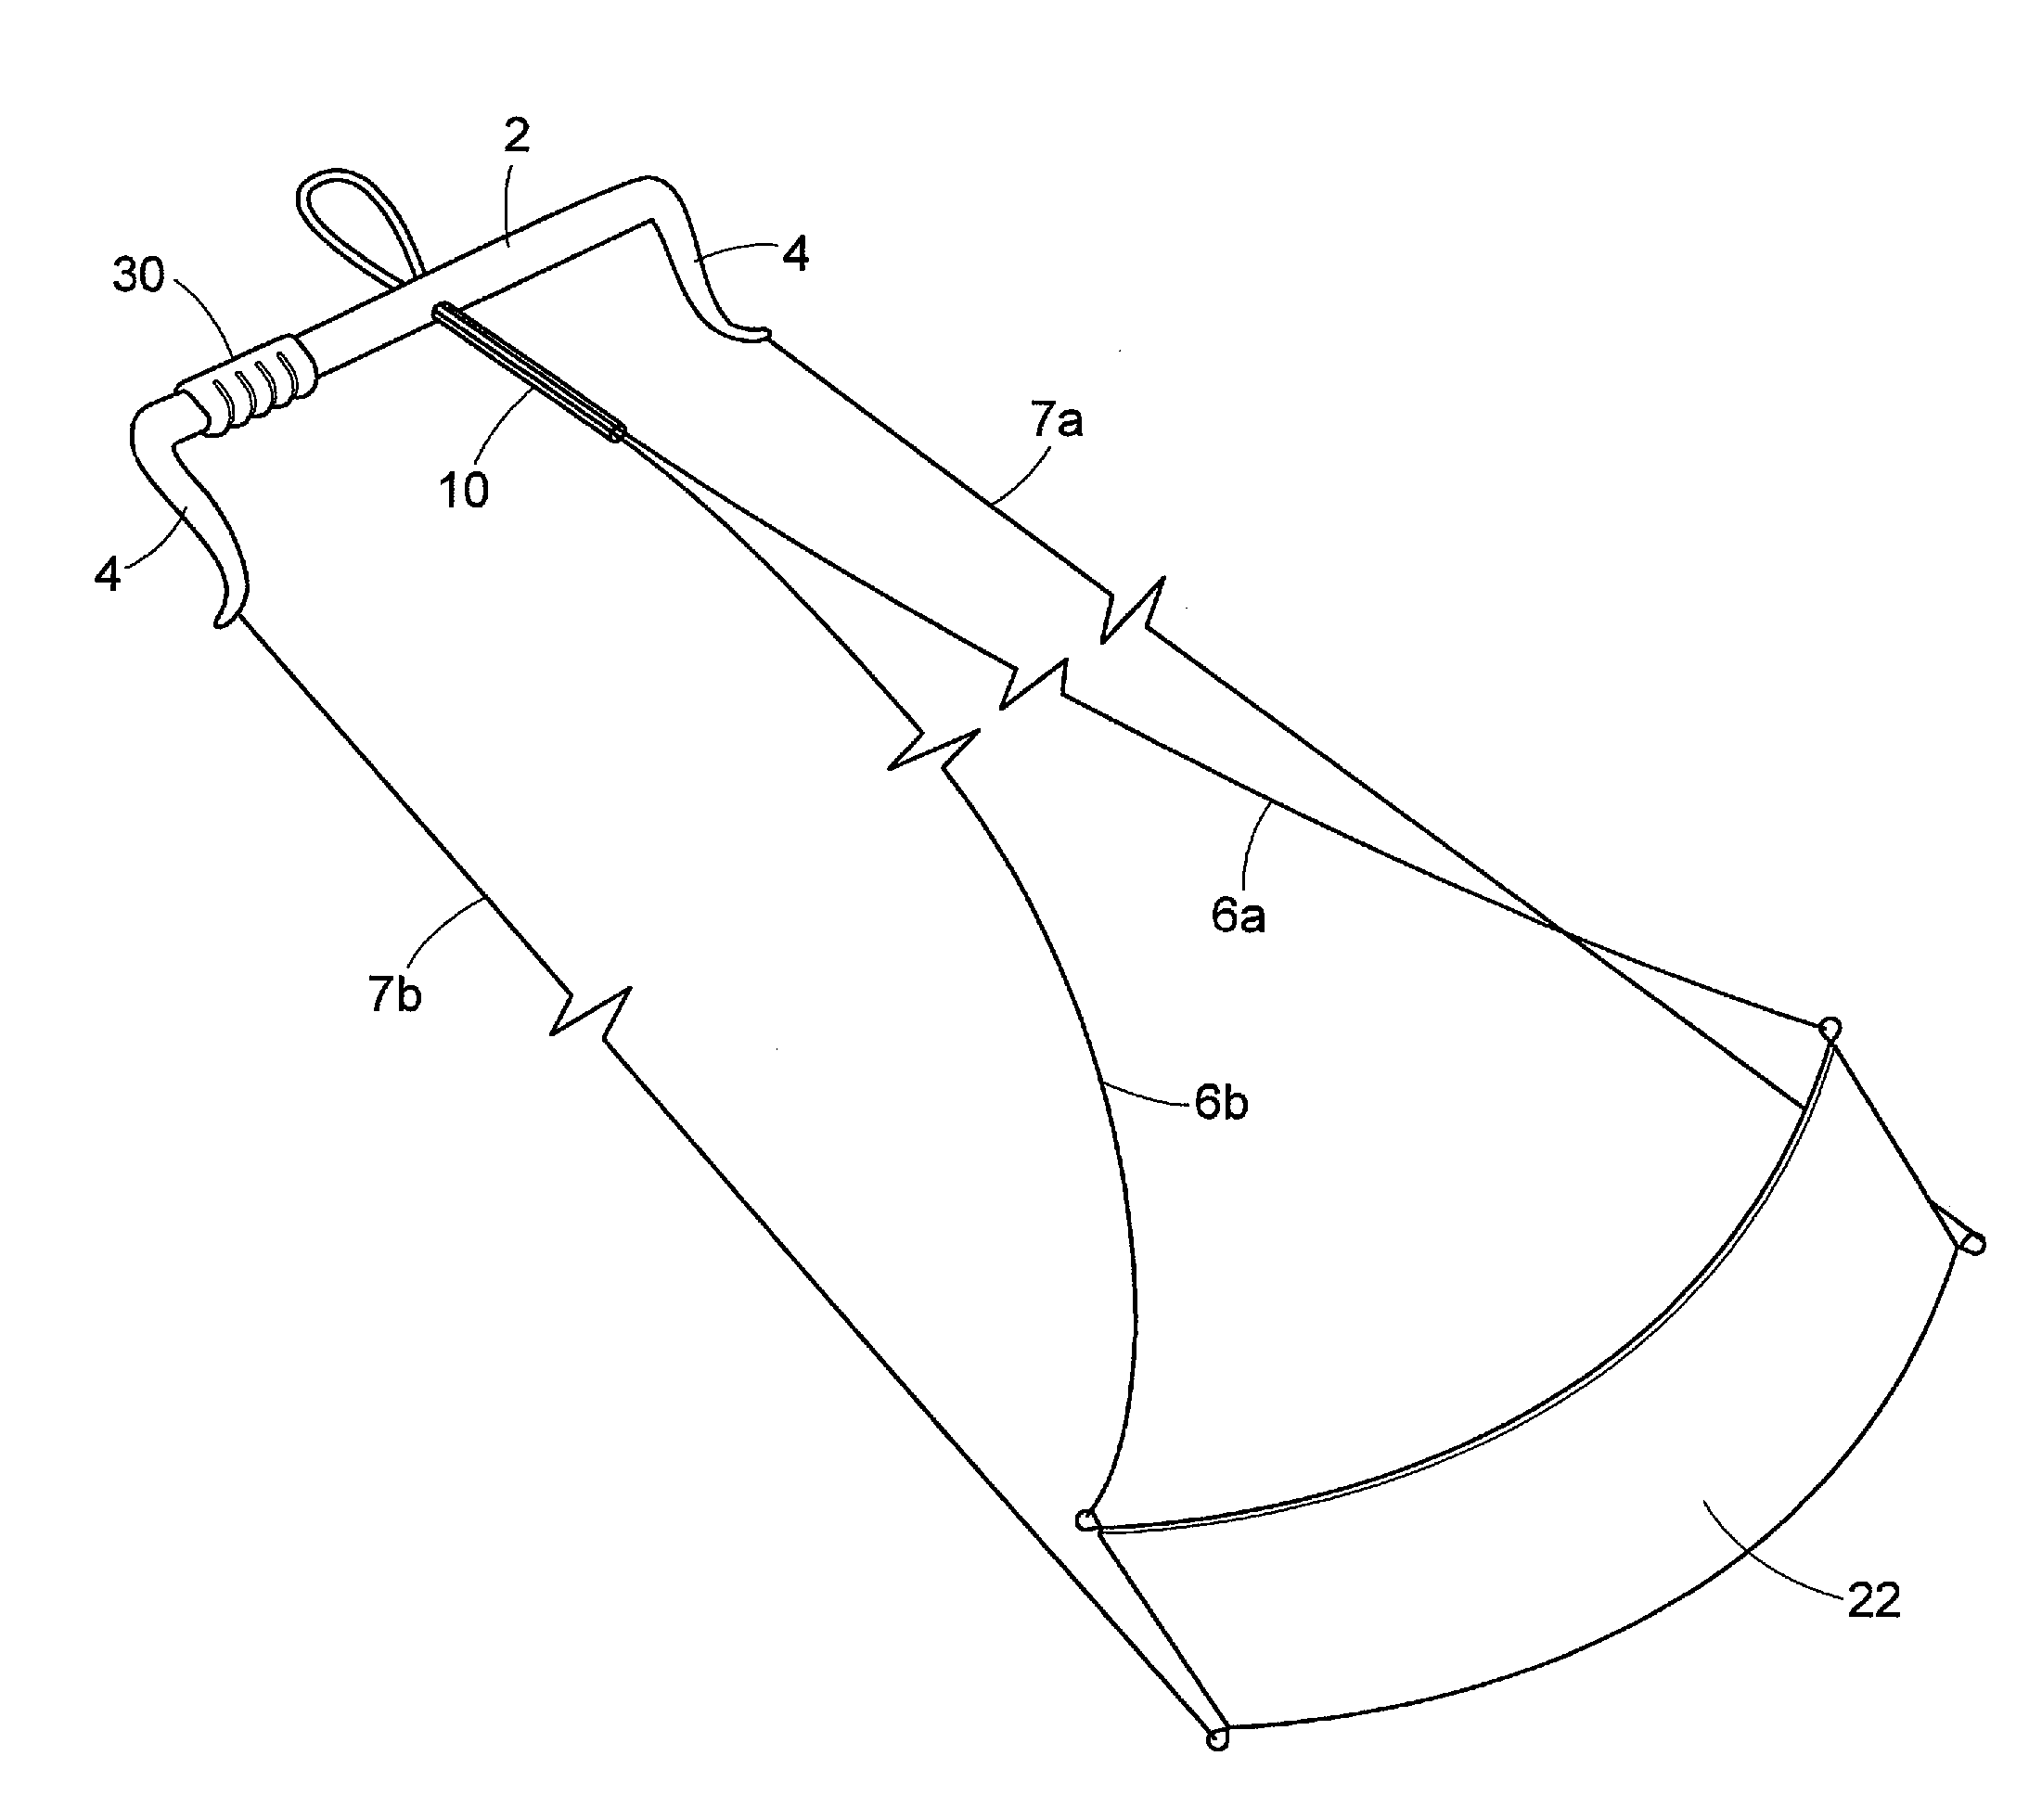 Detachable Line Management Device for Traction Kites